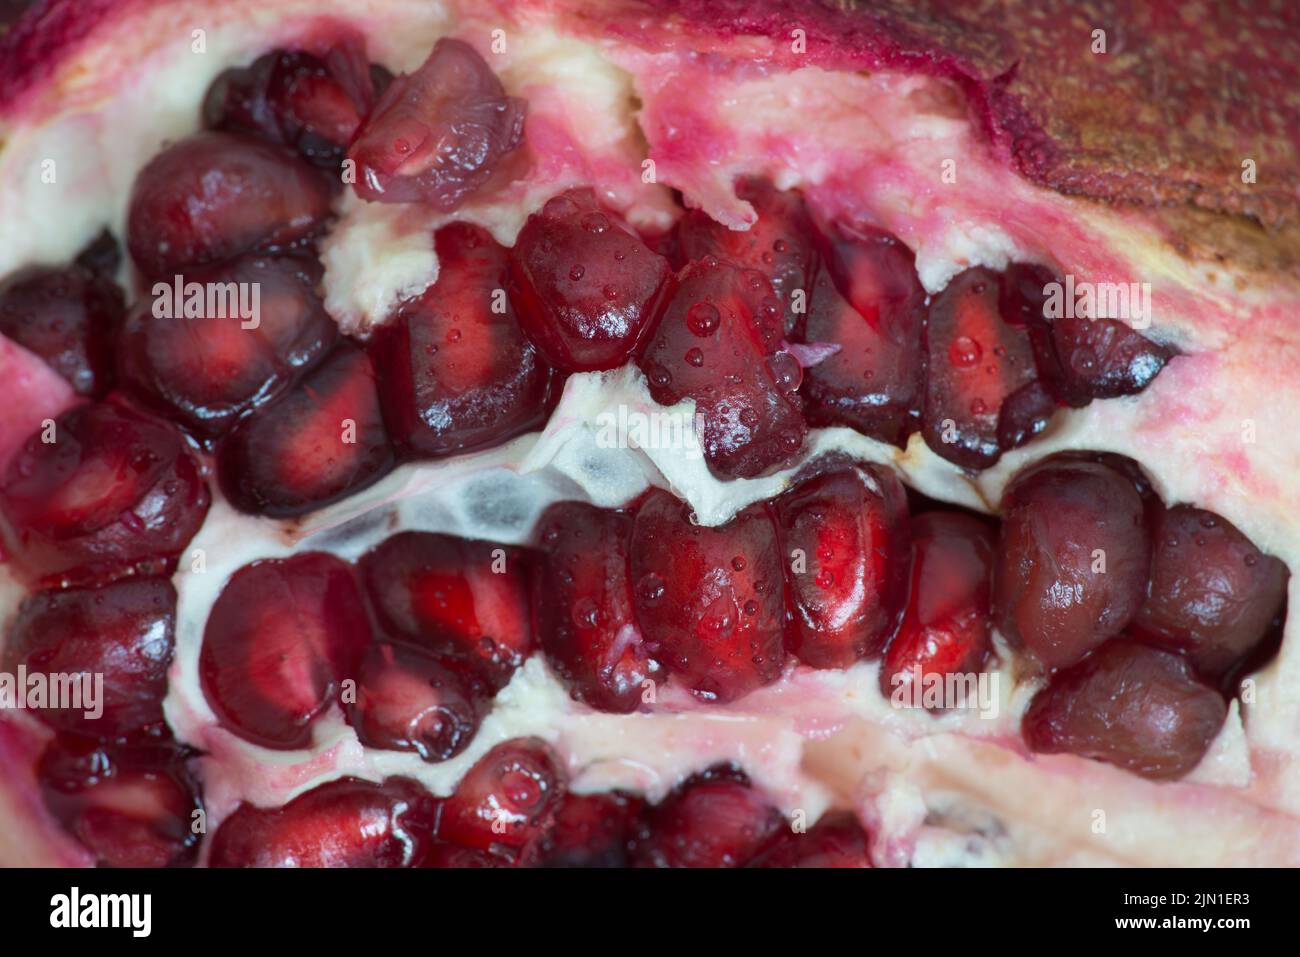 A split open pomegranate exposing the deep red seeds amongst the white pulp. Stock Photo